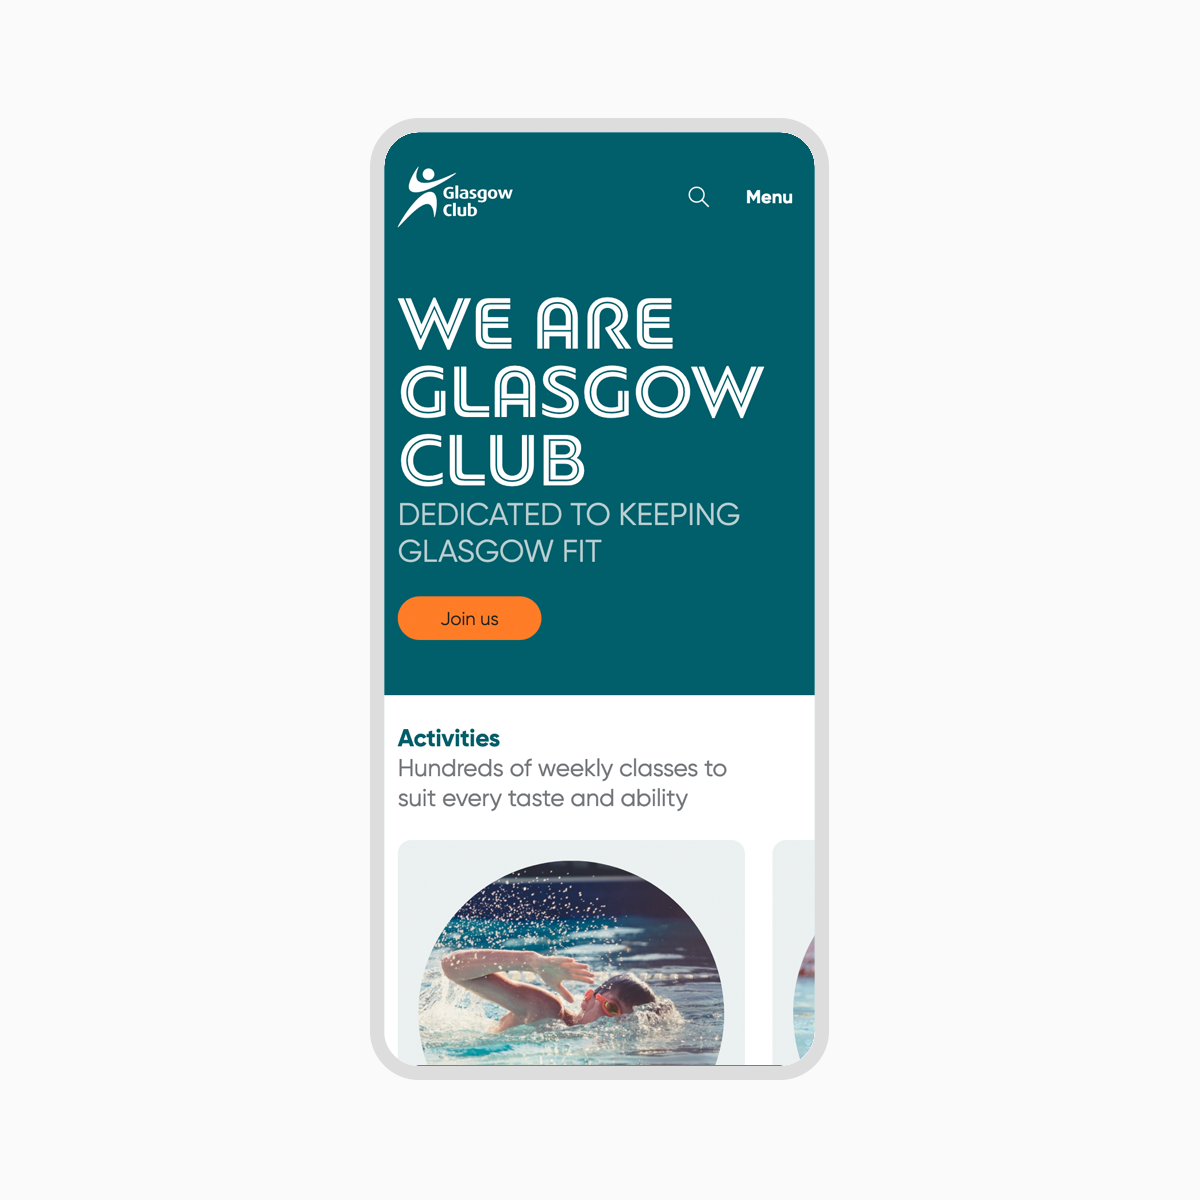 Glasgow Club website on a smart phone, showing the Home page